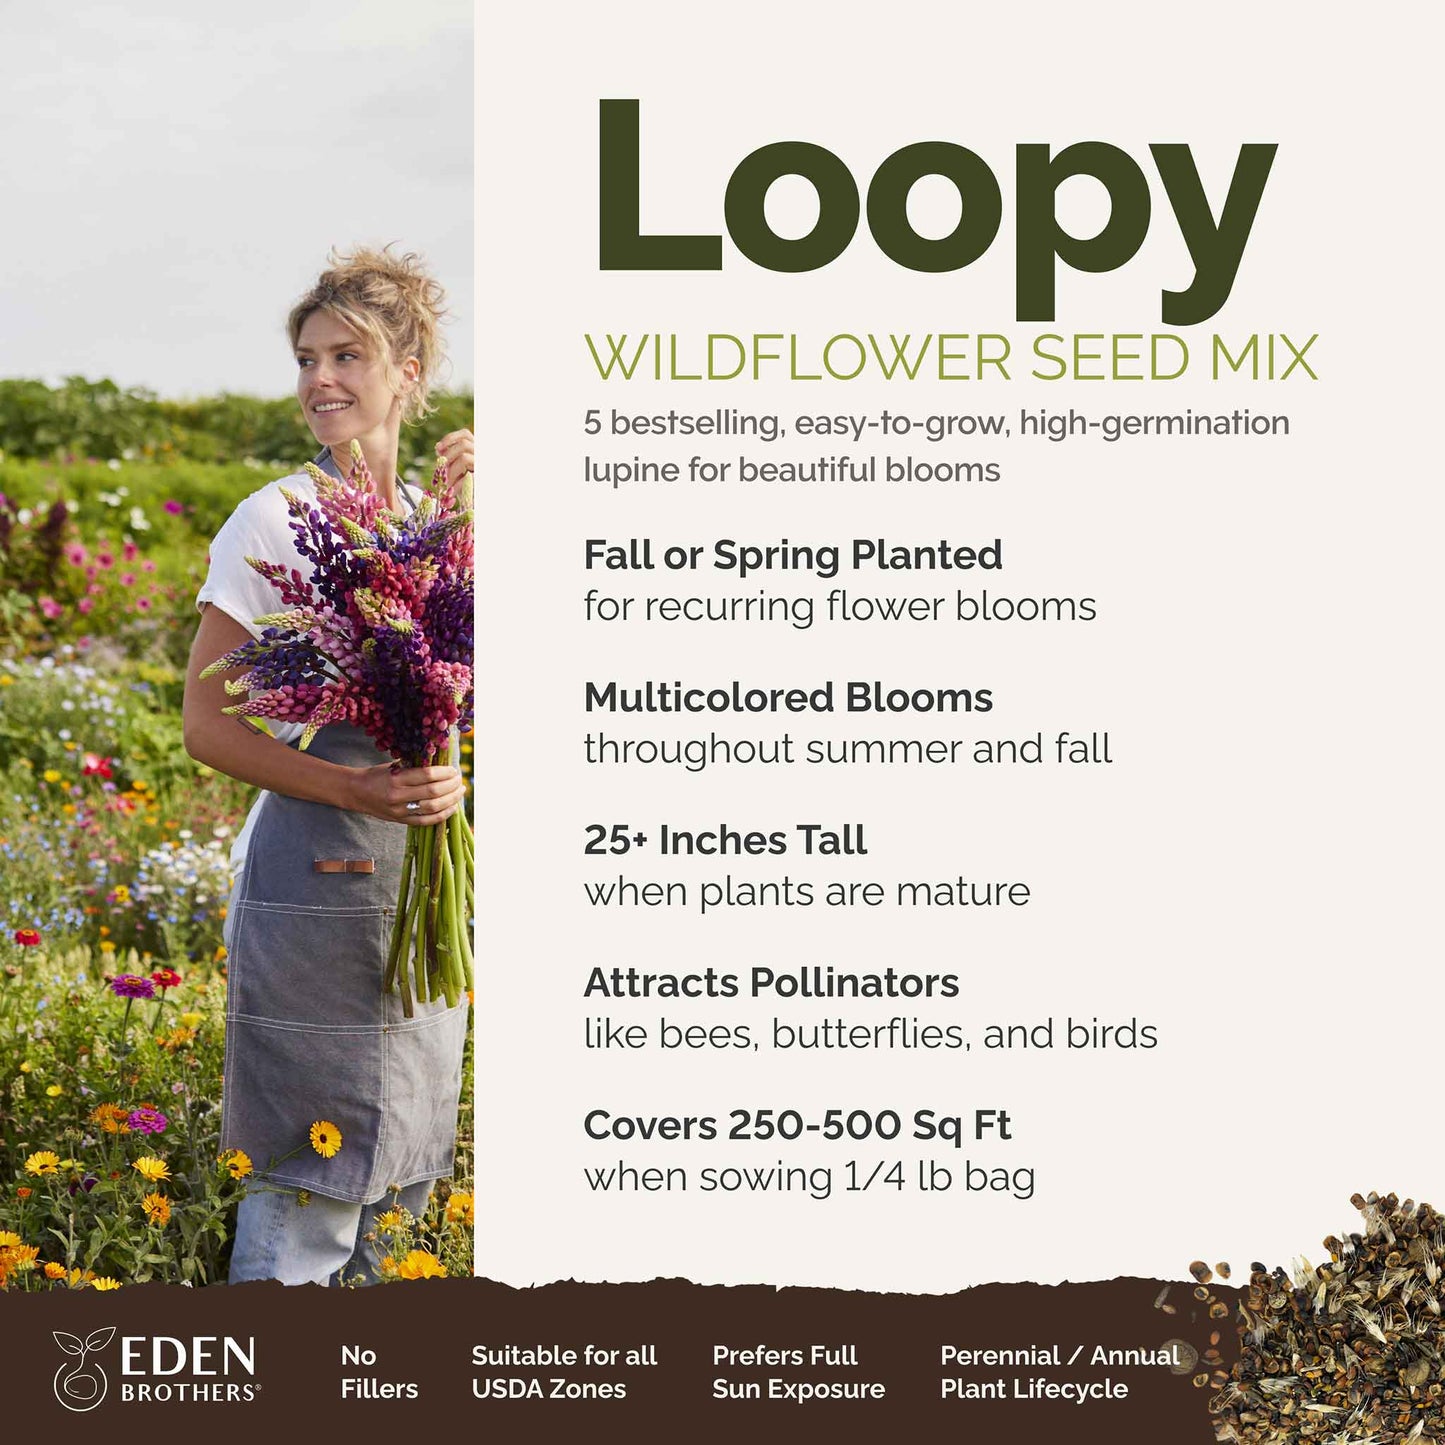 loopy overview